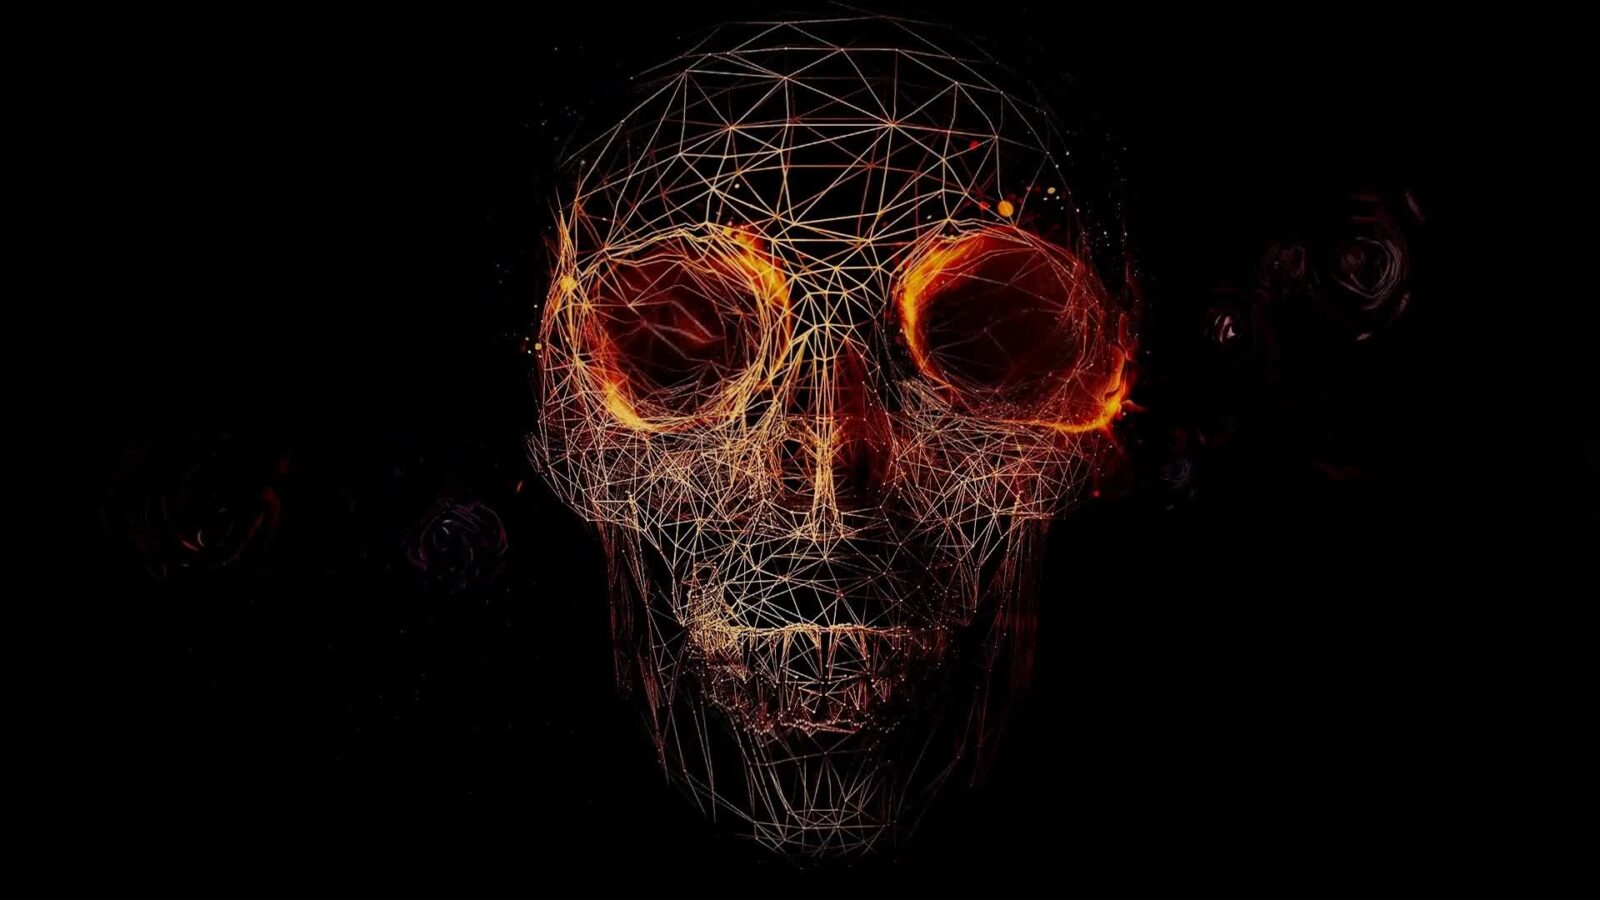 LiveWallpapers4Free.com | 3D Scary Skull Abstract Shapes - Free Live Wallpaper